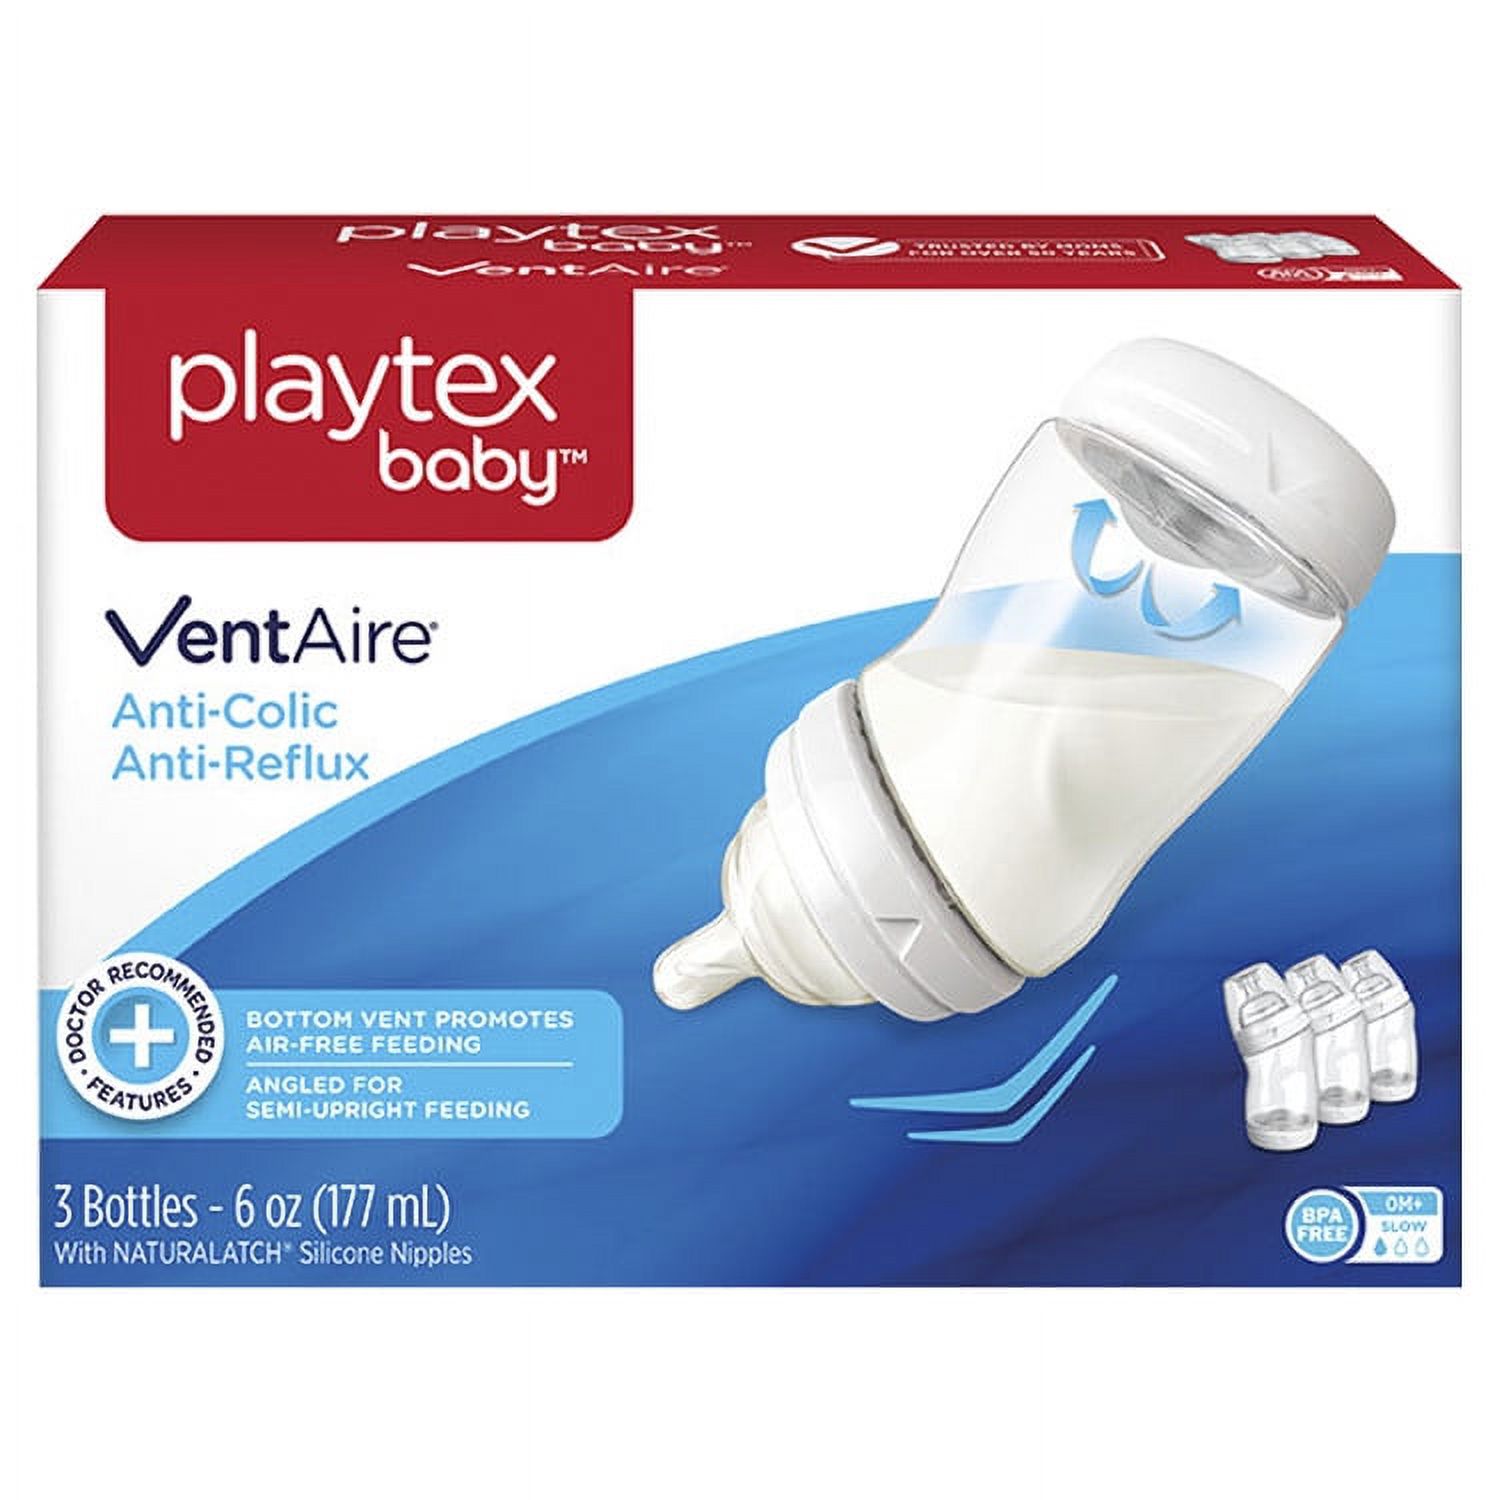 Playtex Baby VentAire Complete Tummy Comfort 6oz 3-Pack Baby Bottle - image 4 of 9